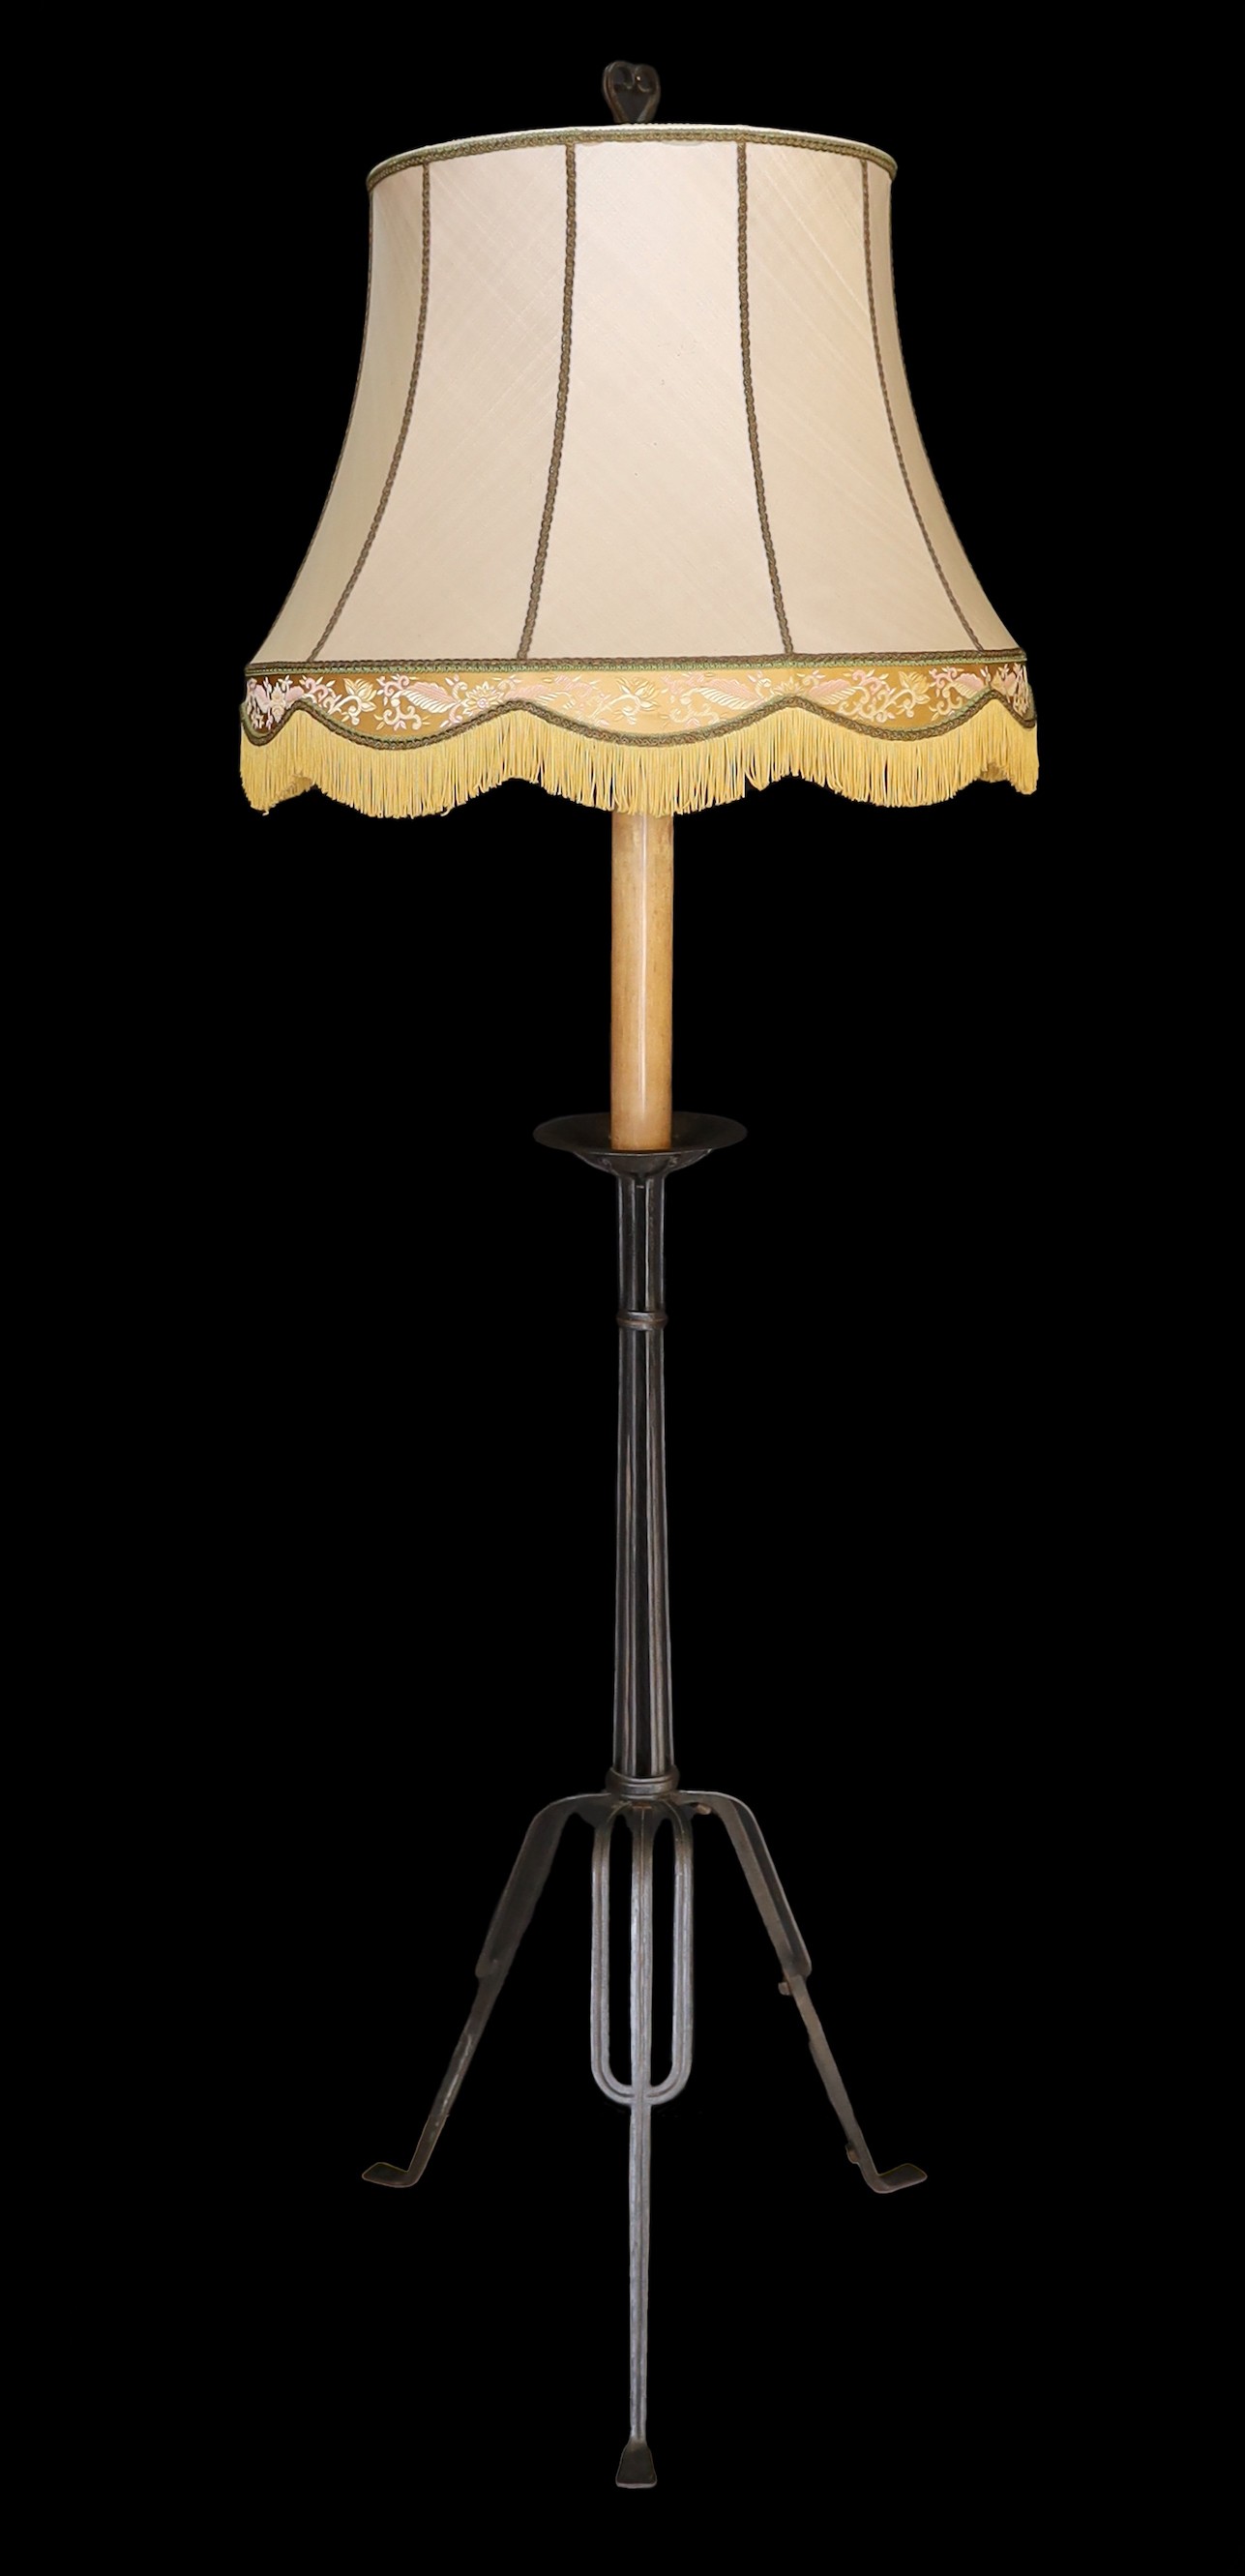 An early 20th century wrought iron lamp standard, height 172cm